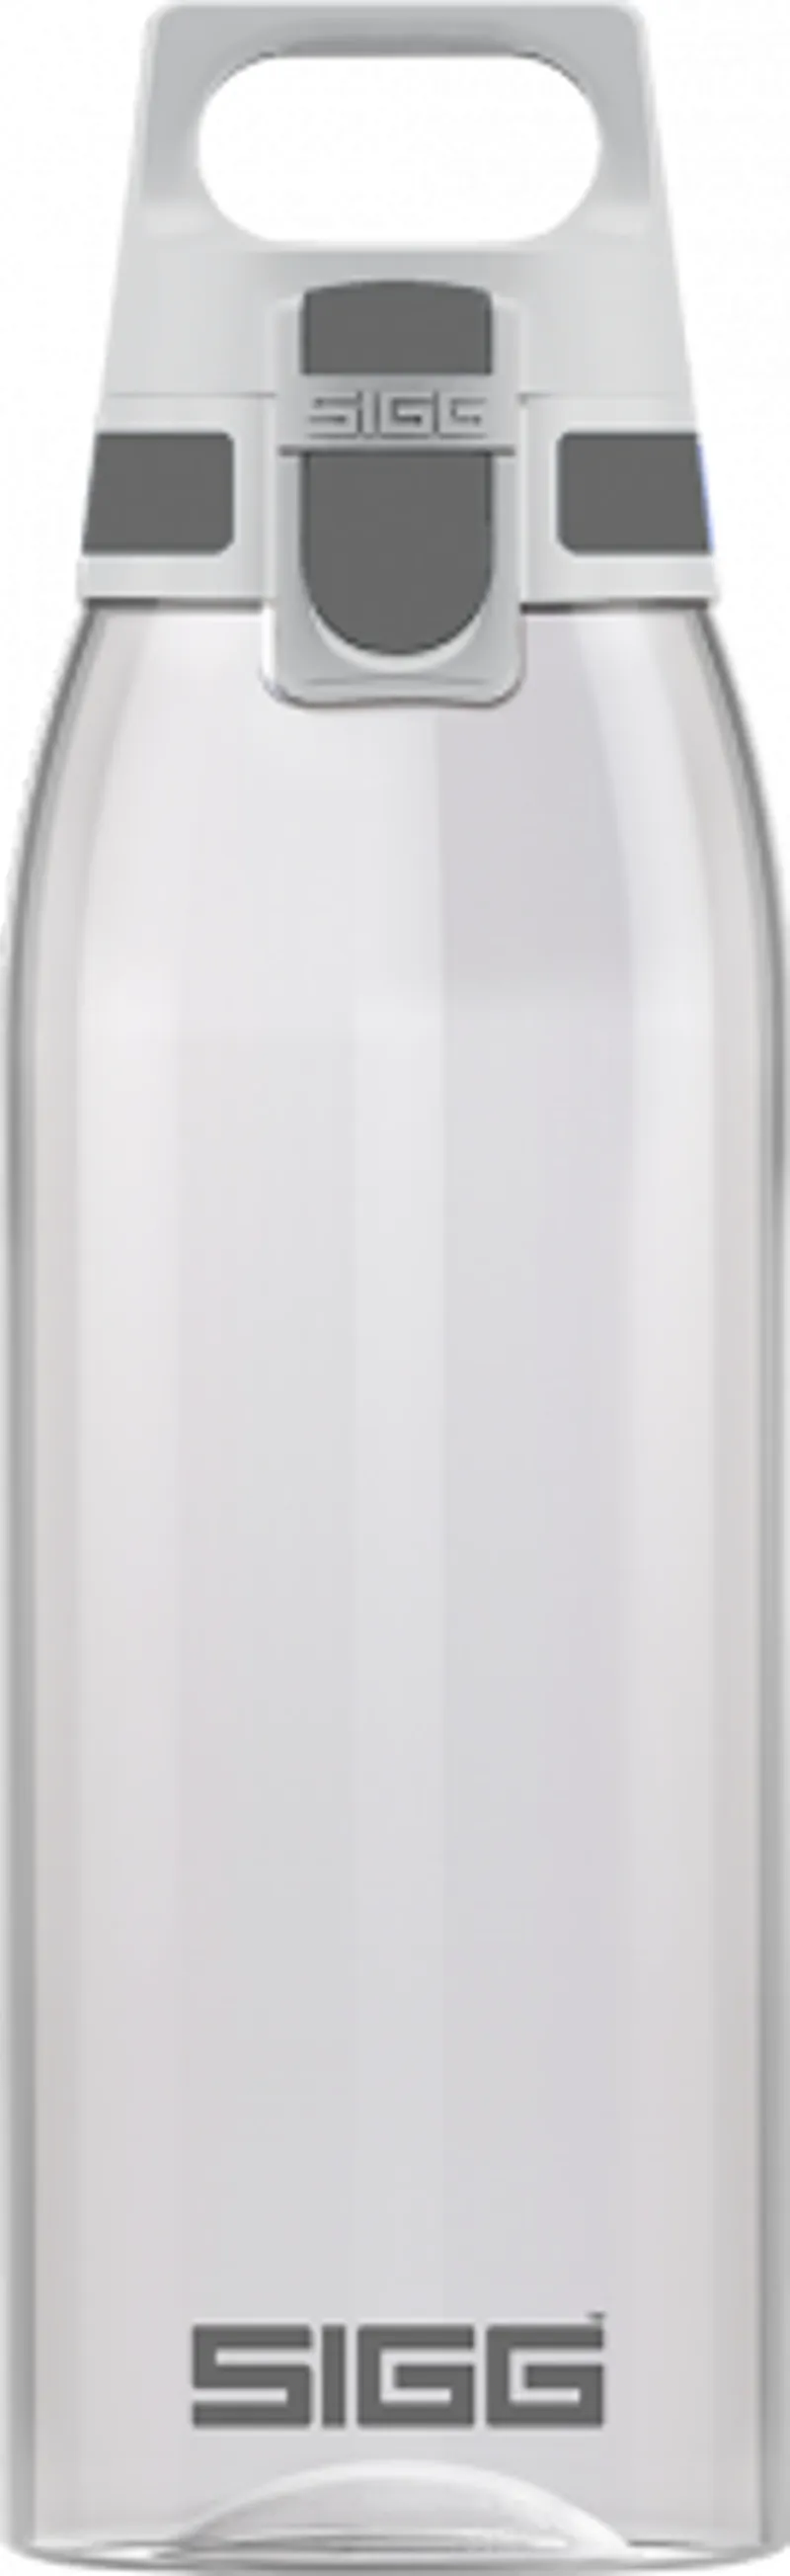 Sigg H&C Thermos Flask Vacumm Insulated Bottle in White Drinking Cup 0.75 or 1L 